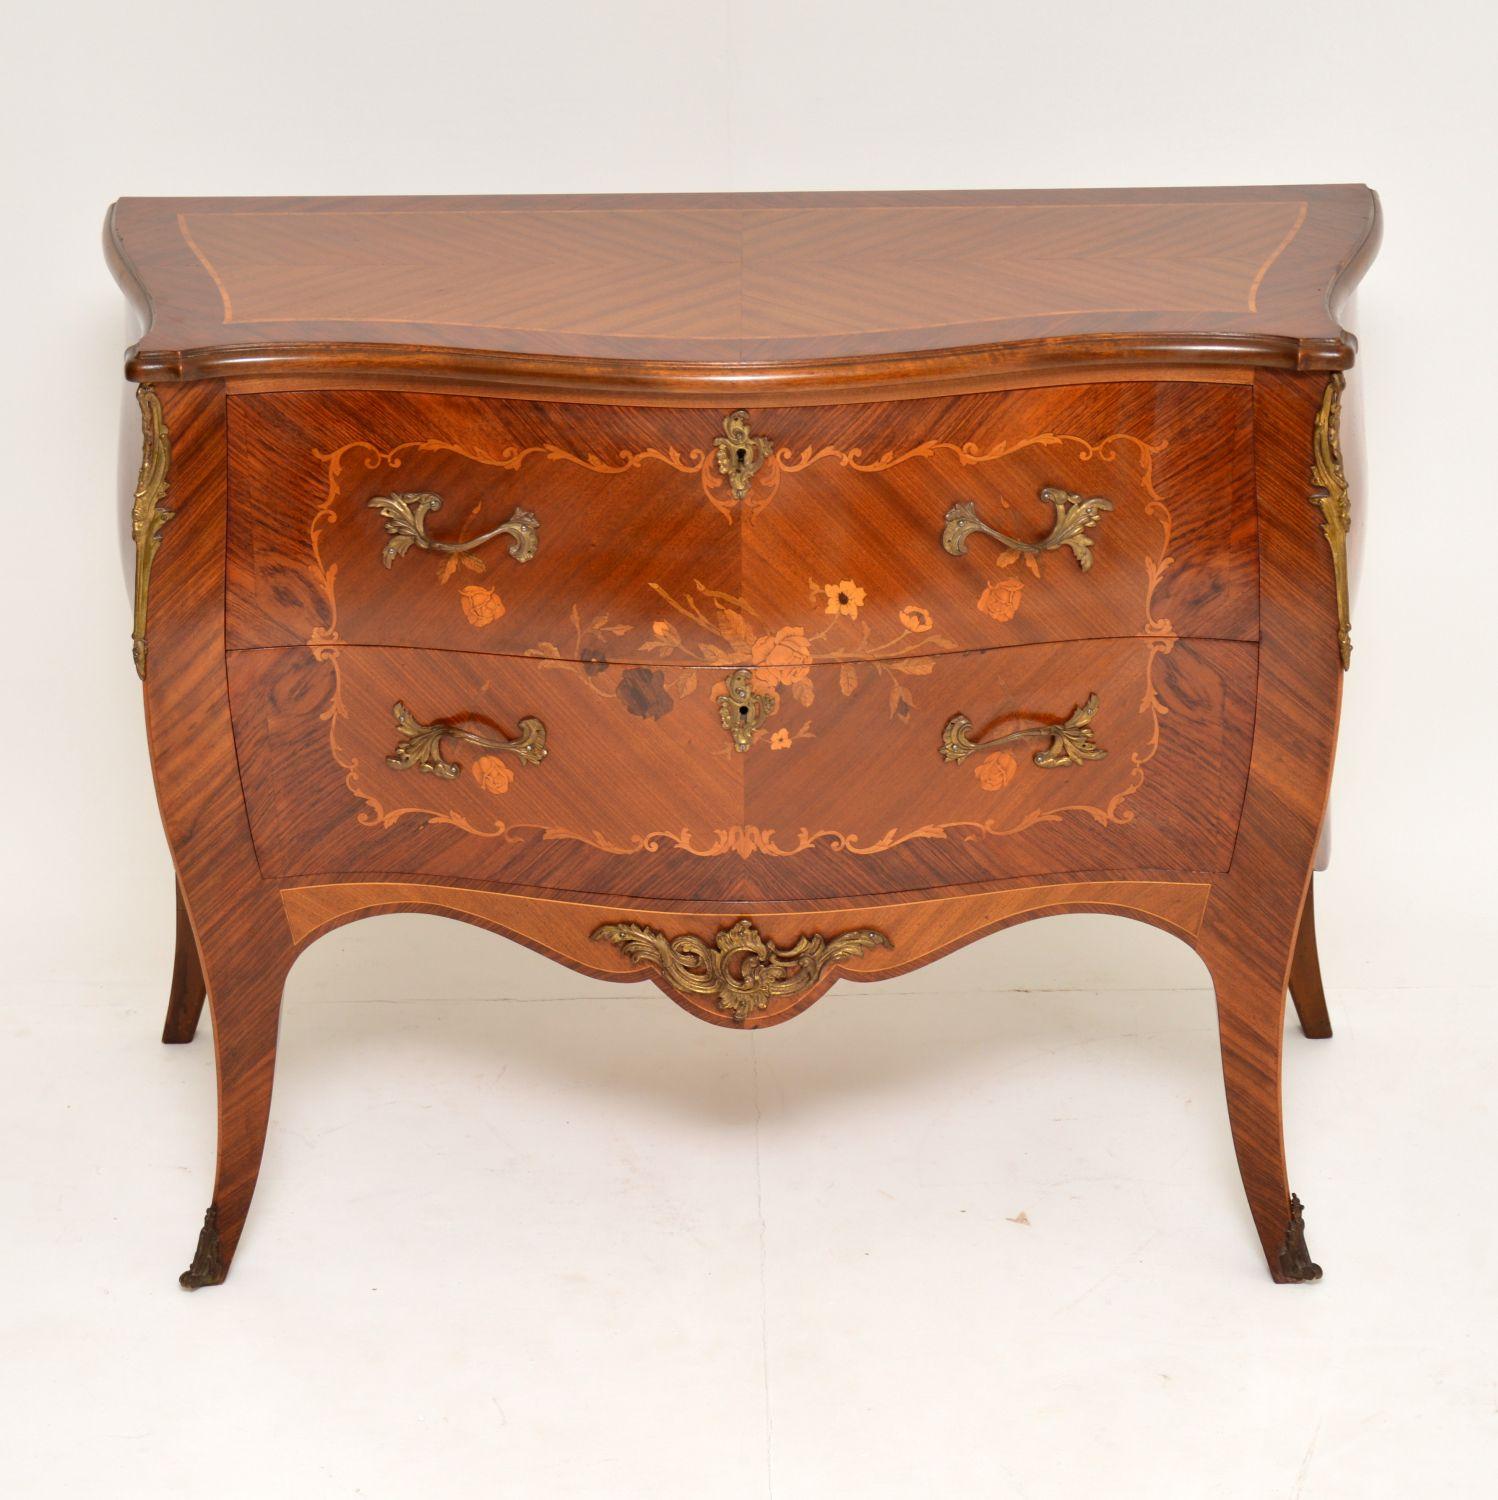 Antique French style bombe chest with inlays and floral marquetry on the drawer fronts and sides. It’s in very good condition and I would date it to circa 1930s period. Unlike most of these commodes, this one has a polished top instead of marble. It